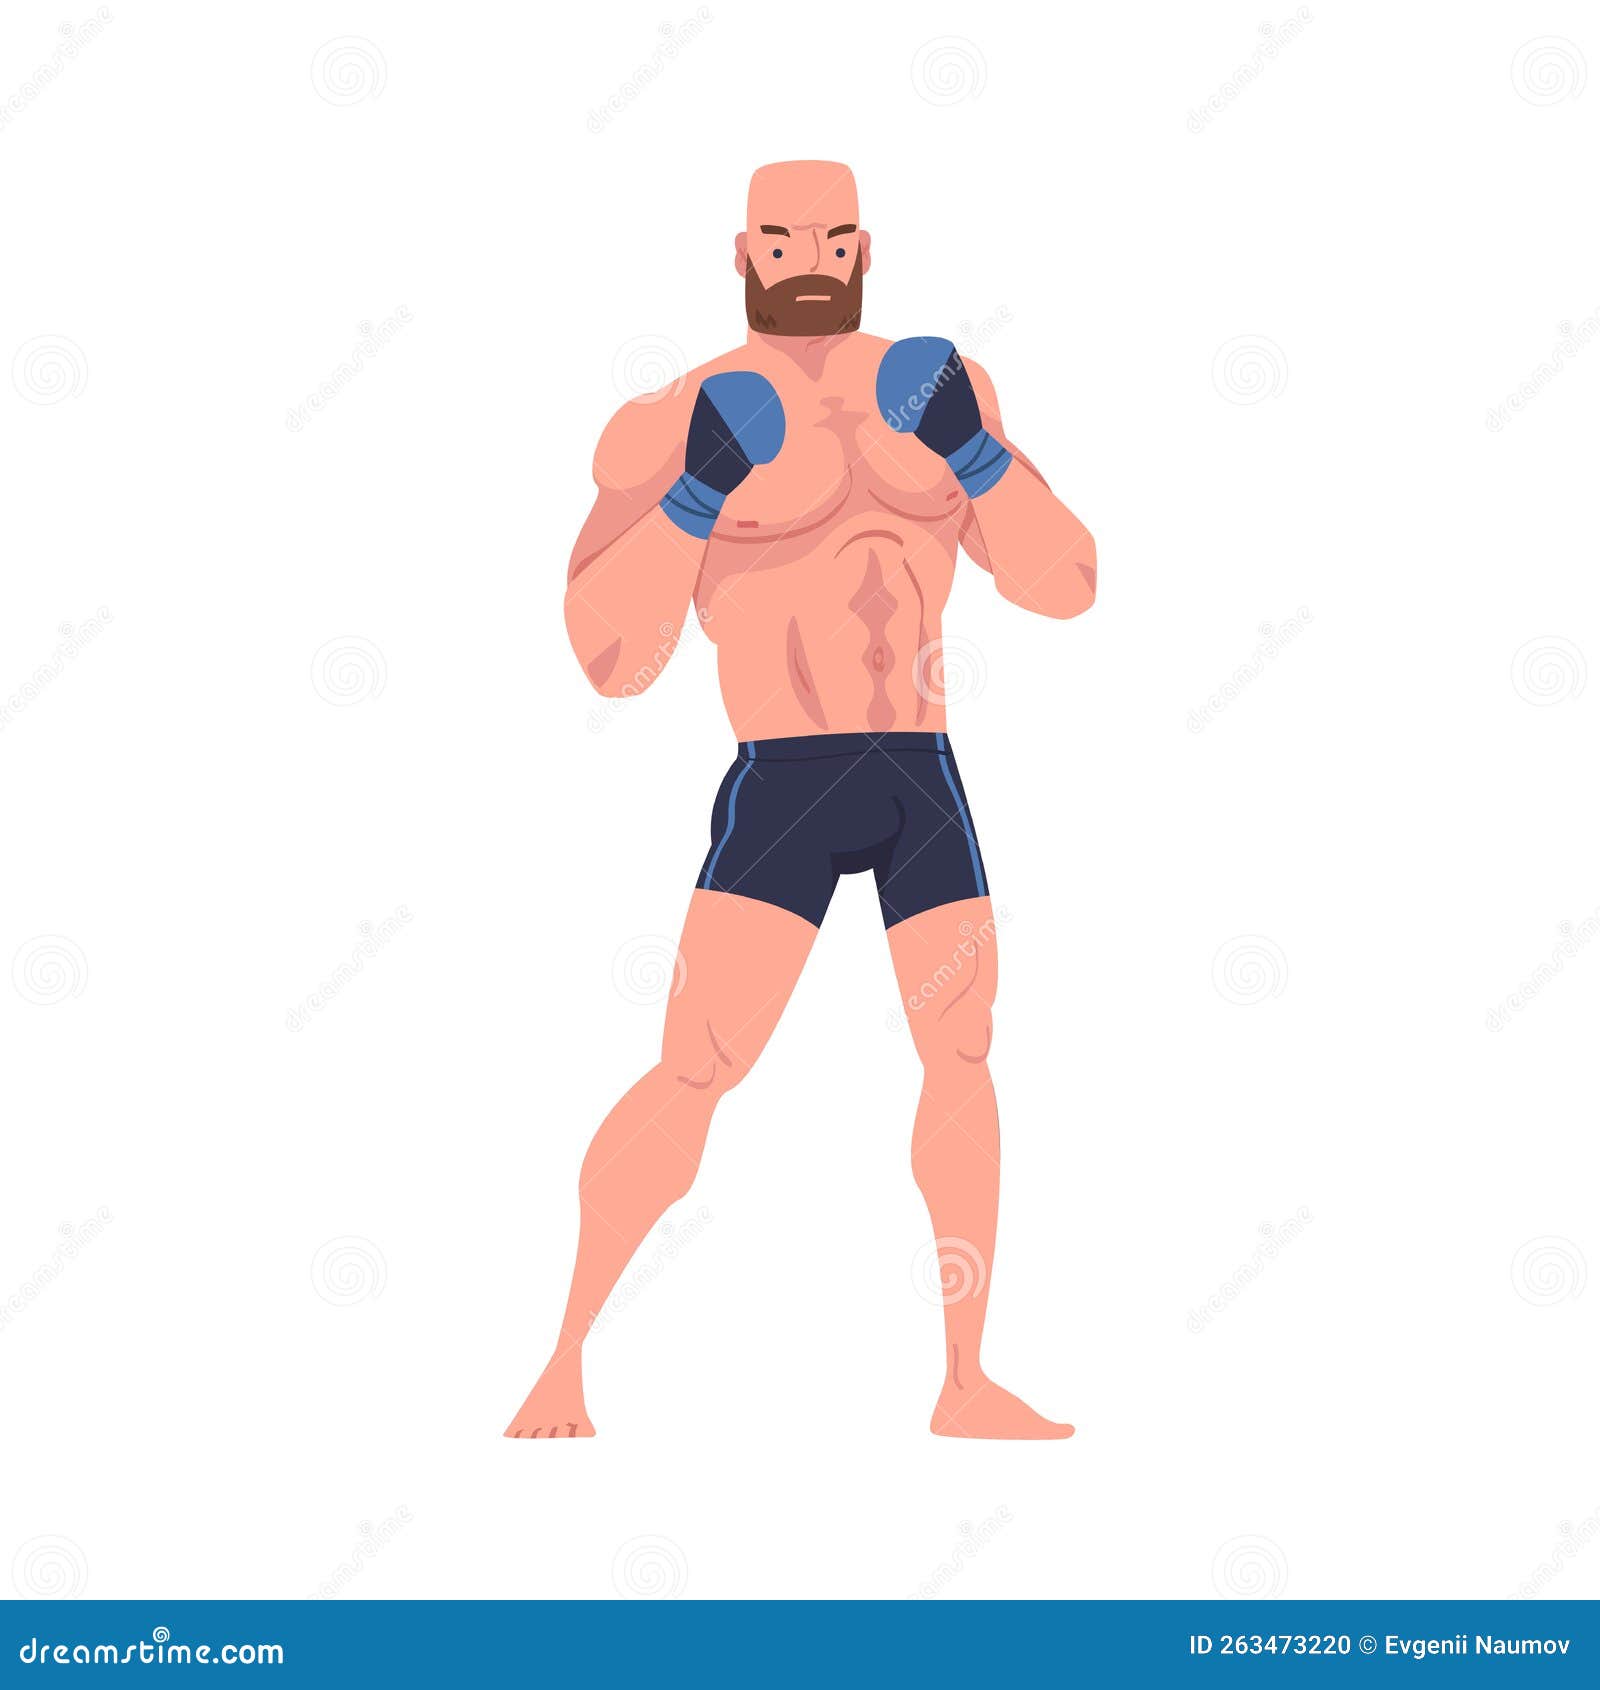 mixed martial arts with man fighter in shorts and boxing gloves engaged in full-contact combat sport  